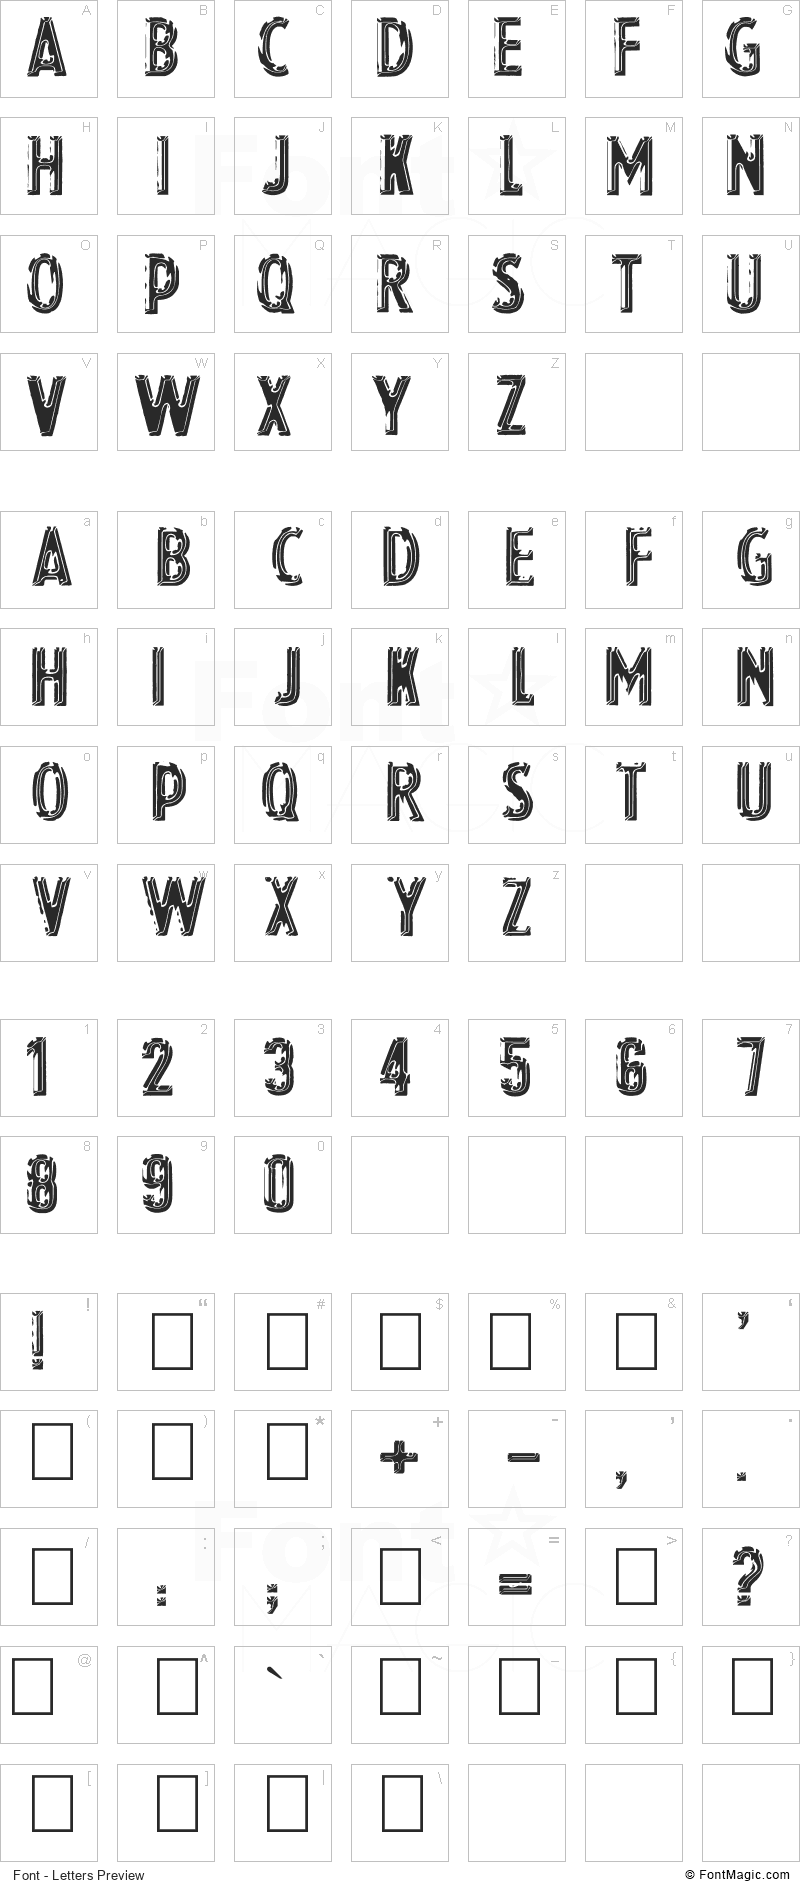 Chrom Font - All Latters Preview Chart